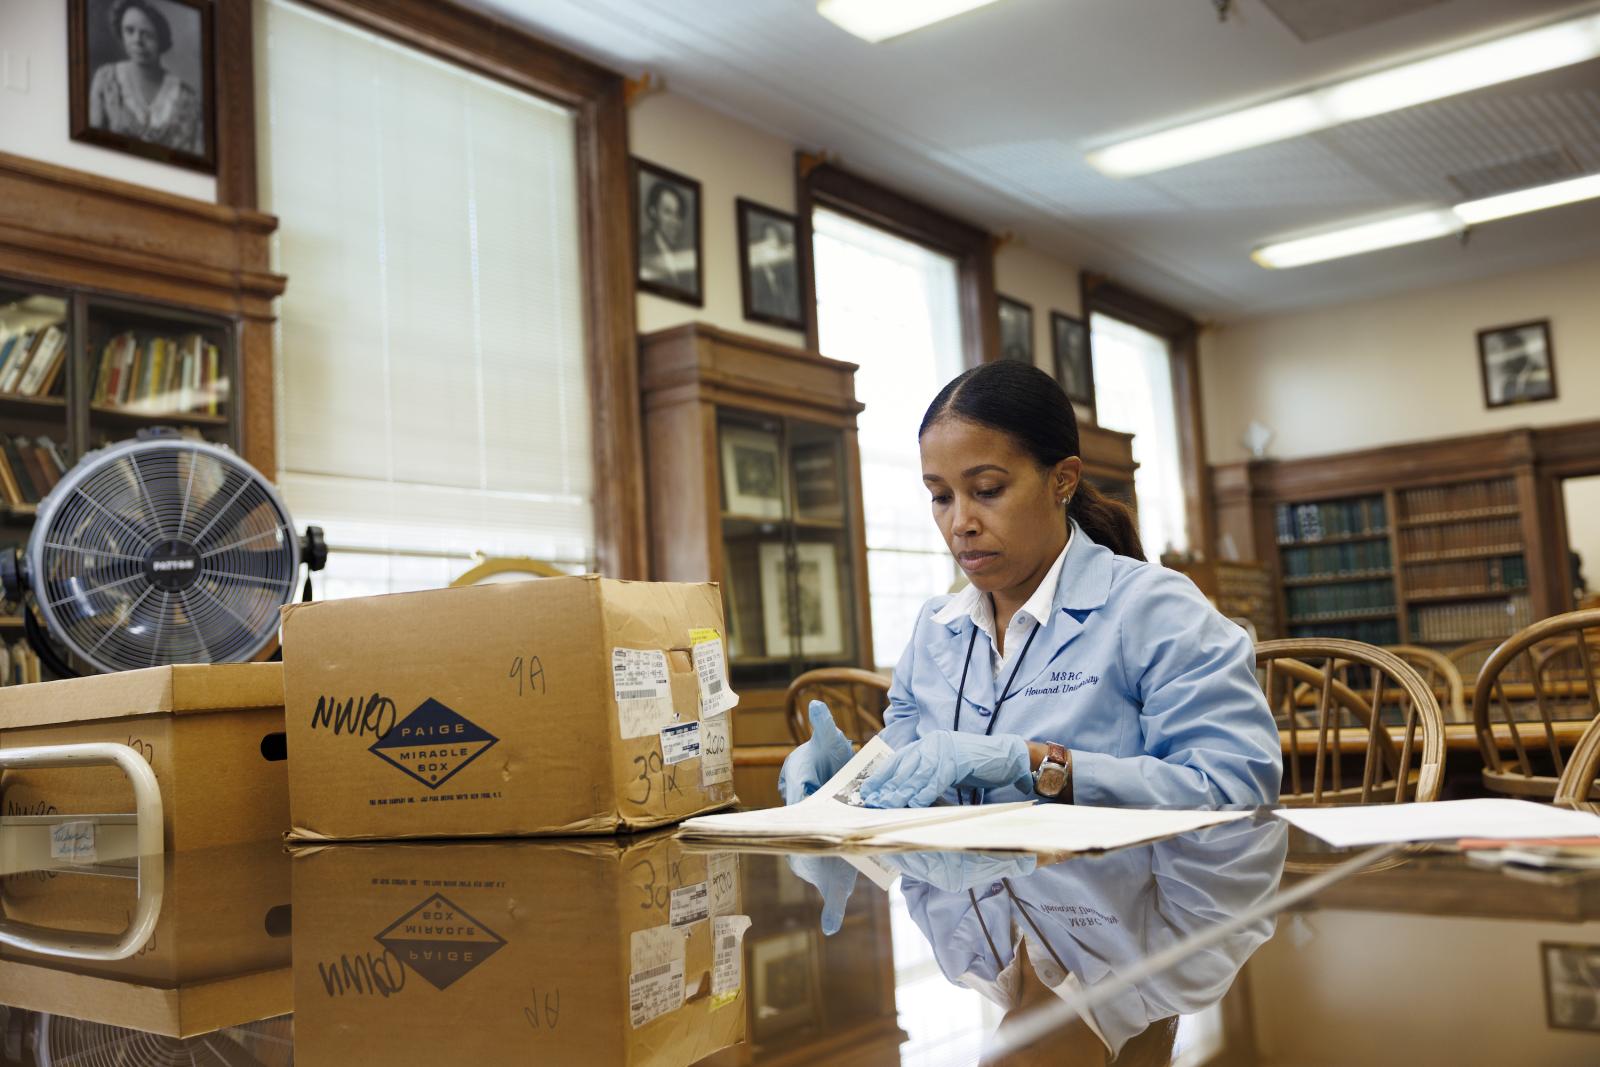 archivist going through archives at Moorland-Spingarn